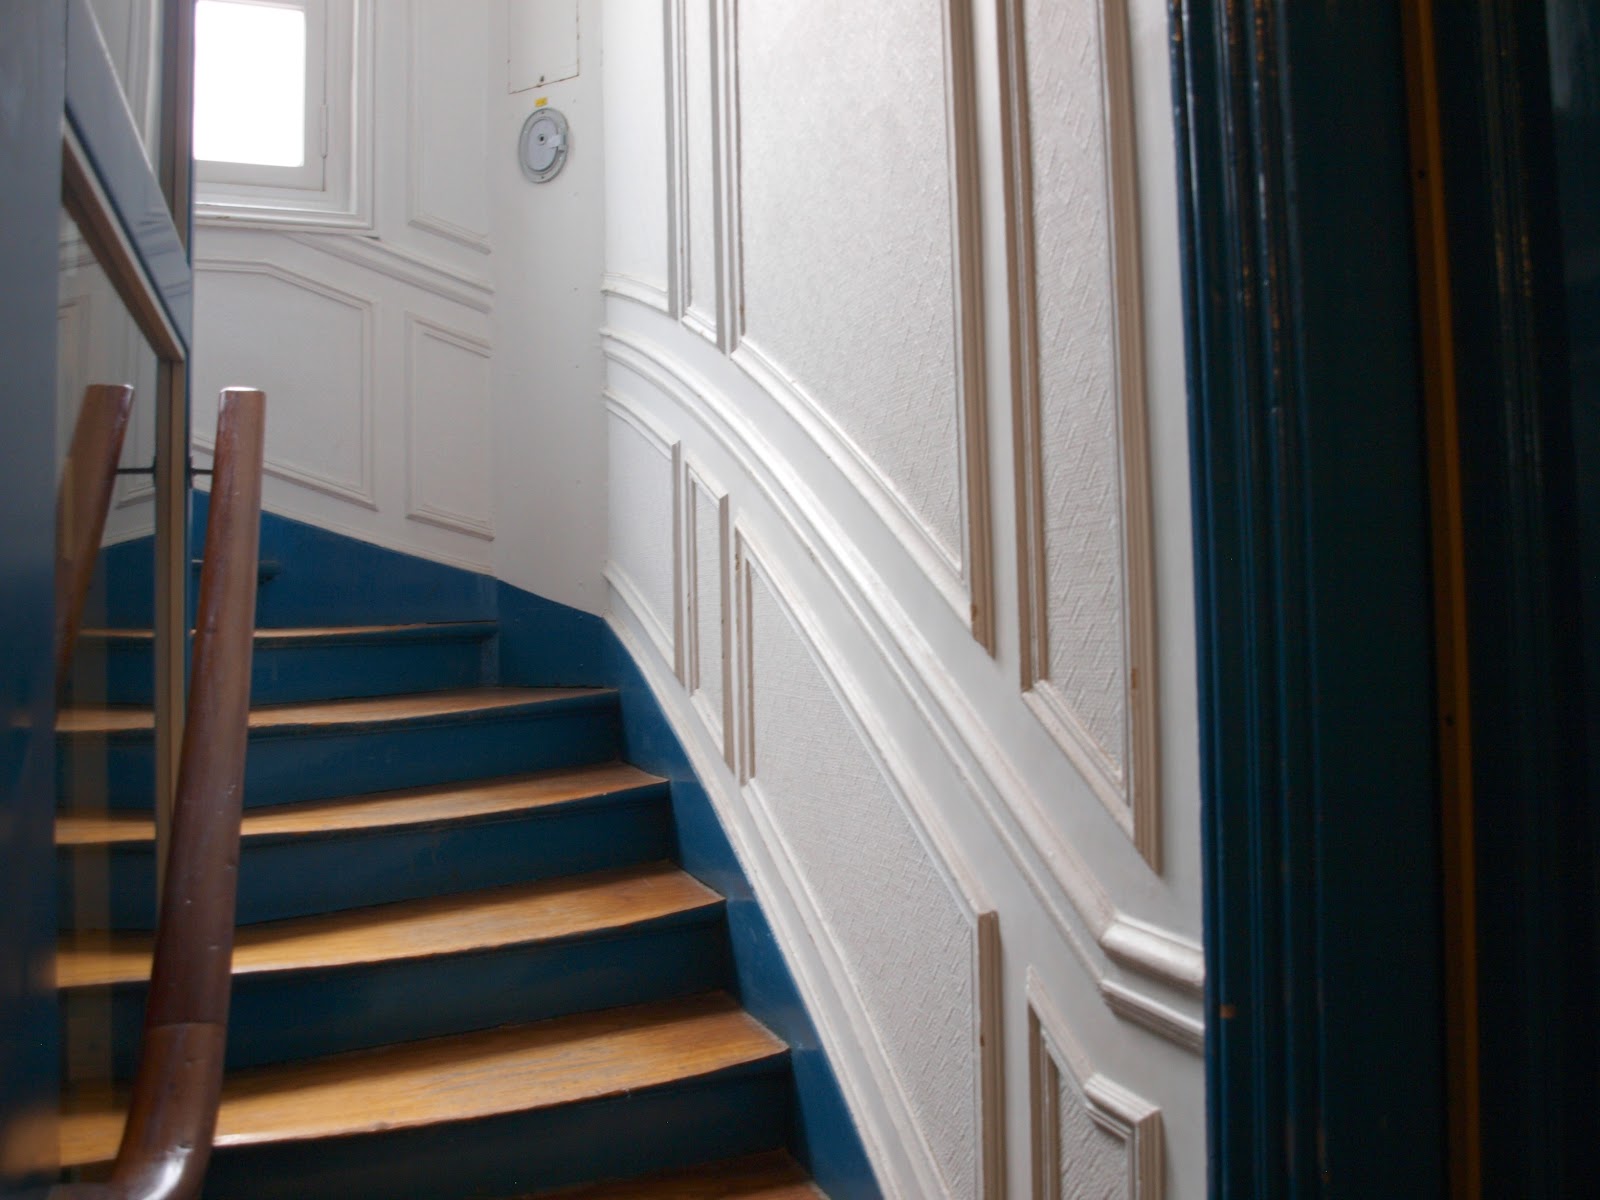 Gorgeous curved #stairway with raised panel moldings in #Parisapartment by Hello Lovely Studio